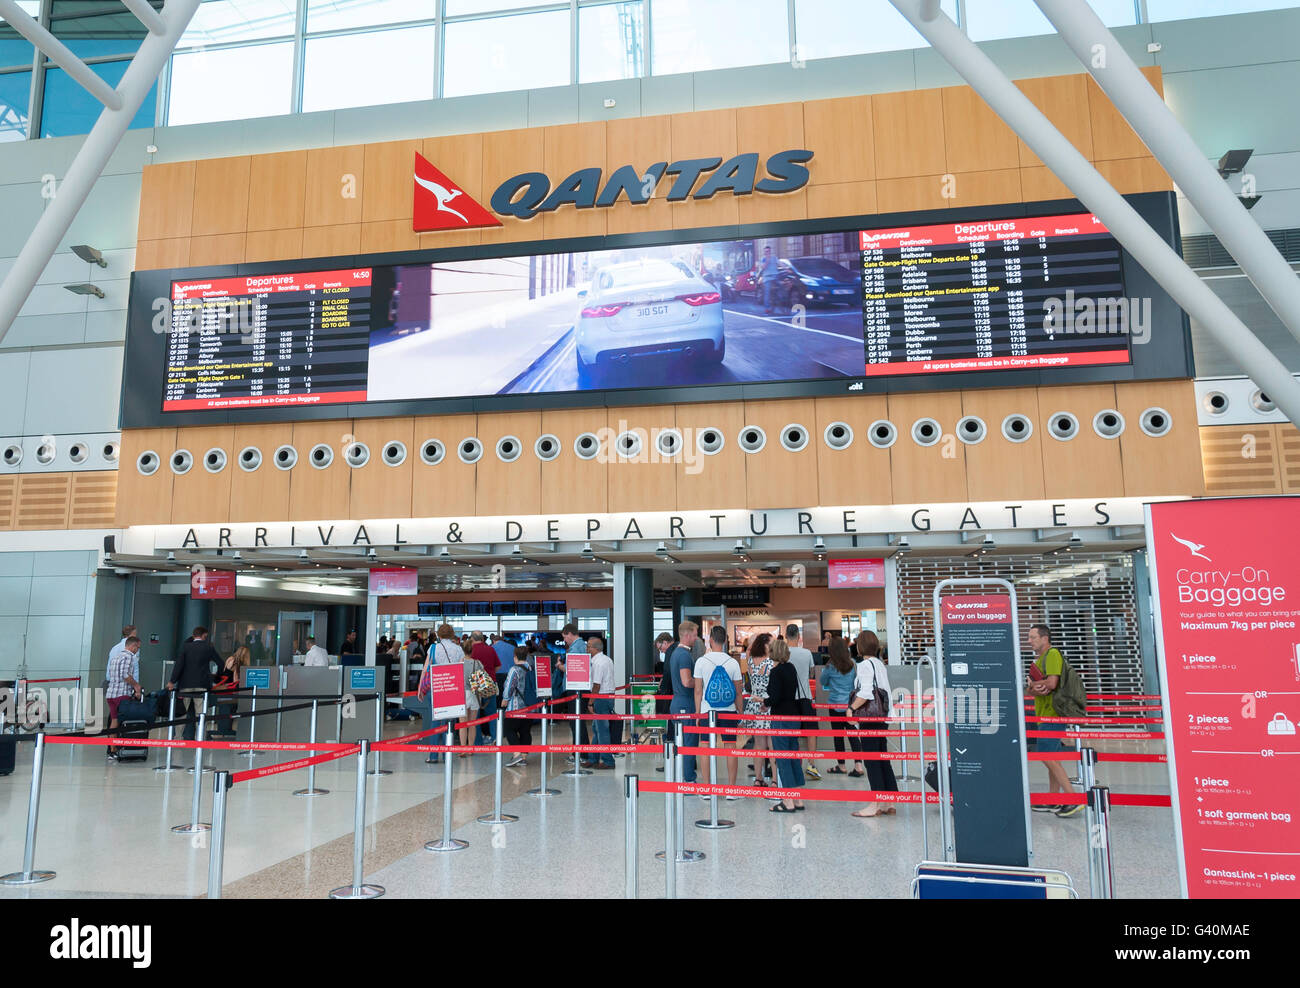 Arrival & Departure Gates at at Sydney Kingsford Smith Airport, Mascot, Sydney, New South Wales, Australia Stock Photo